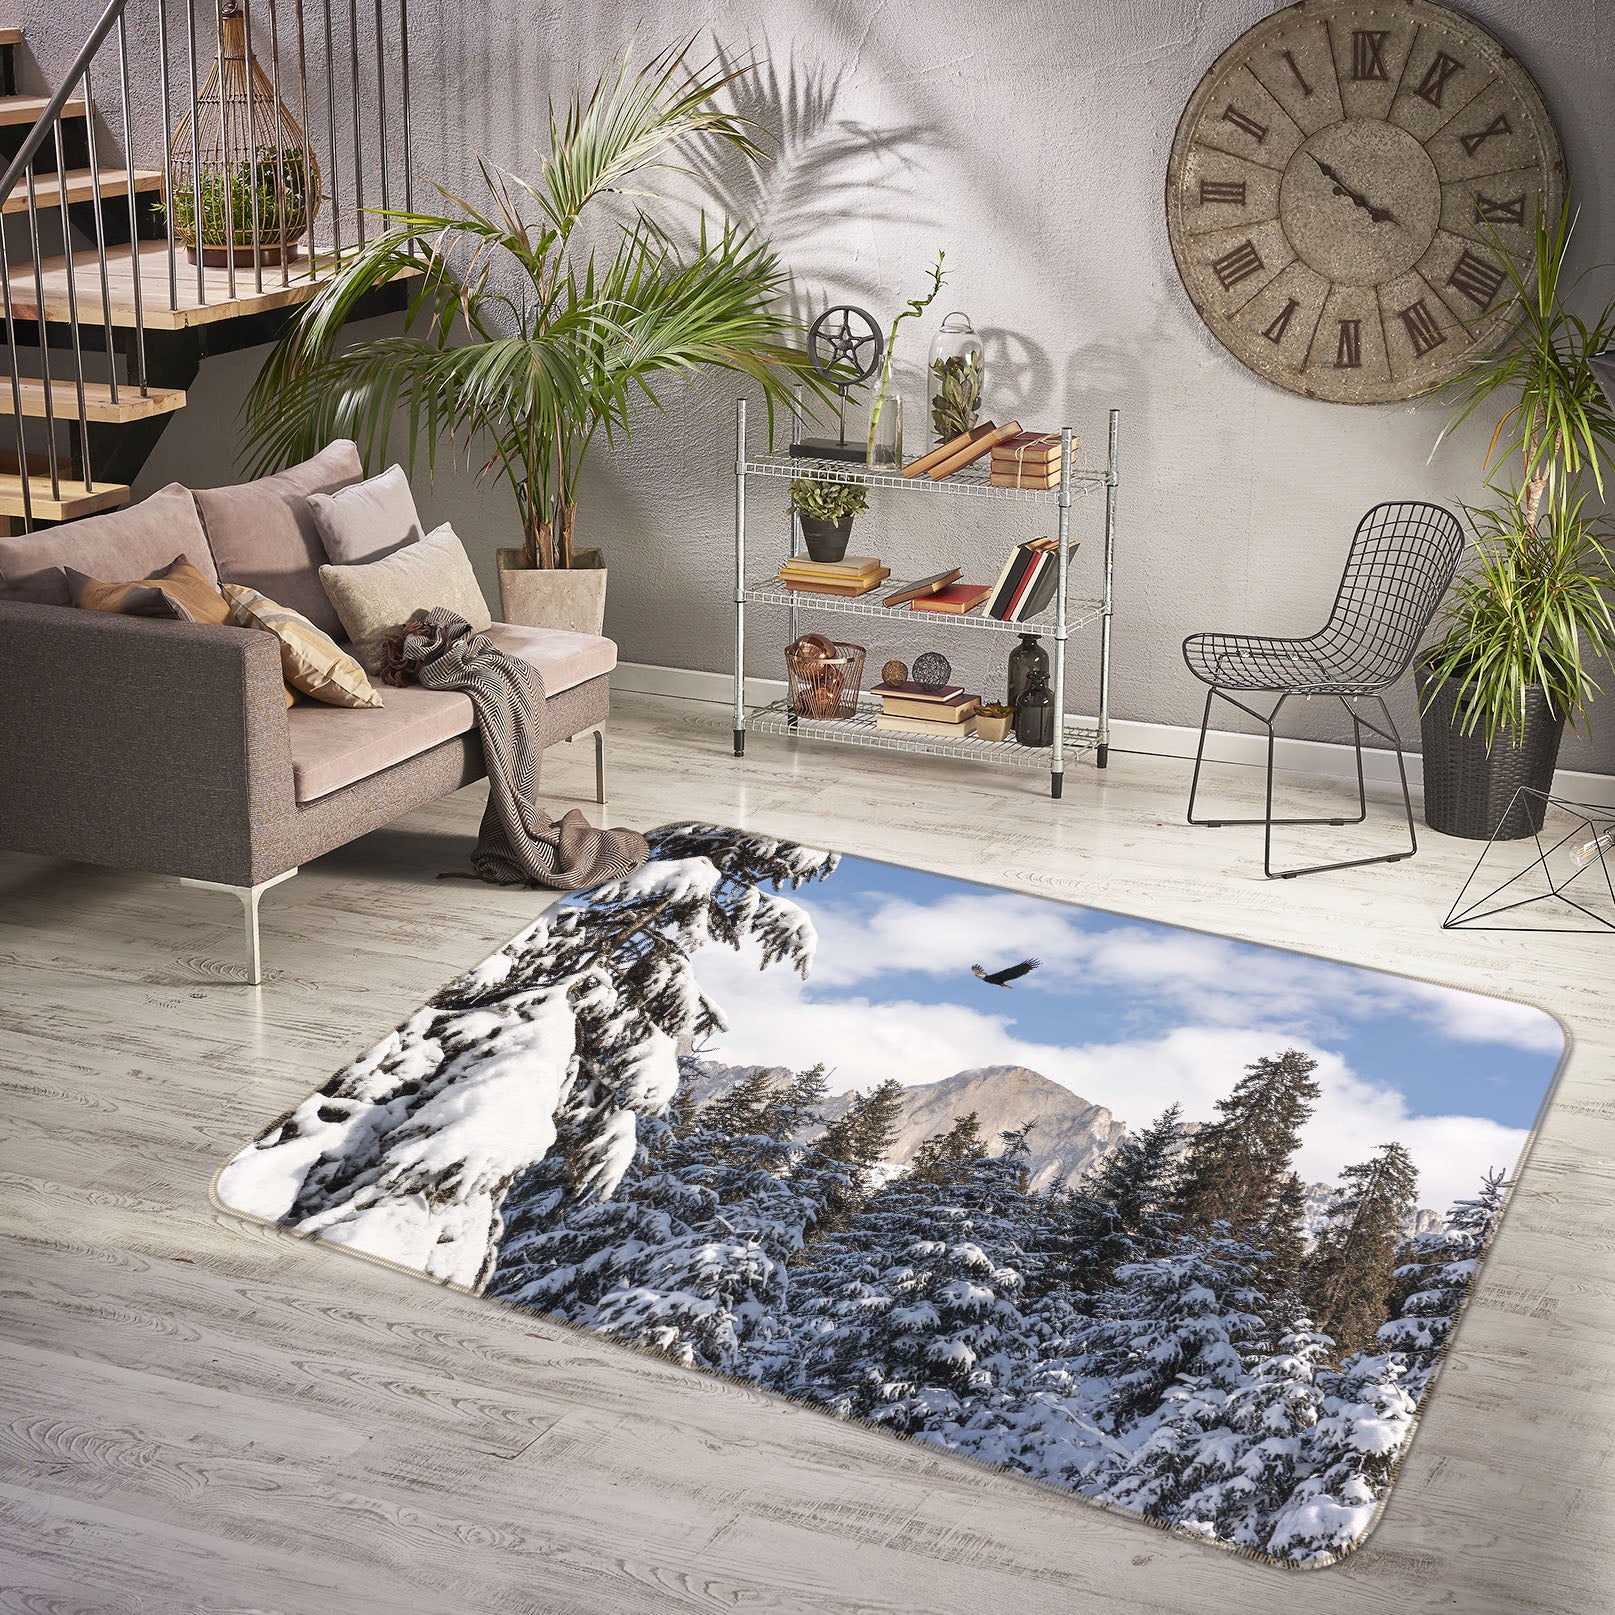 3D Heavy Snow Forest 1155 Marco Carmassi Rug Non Slip Rug Mat